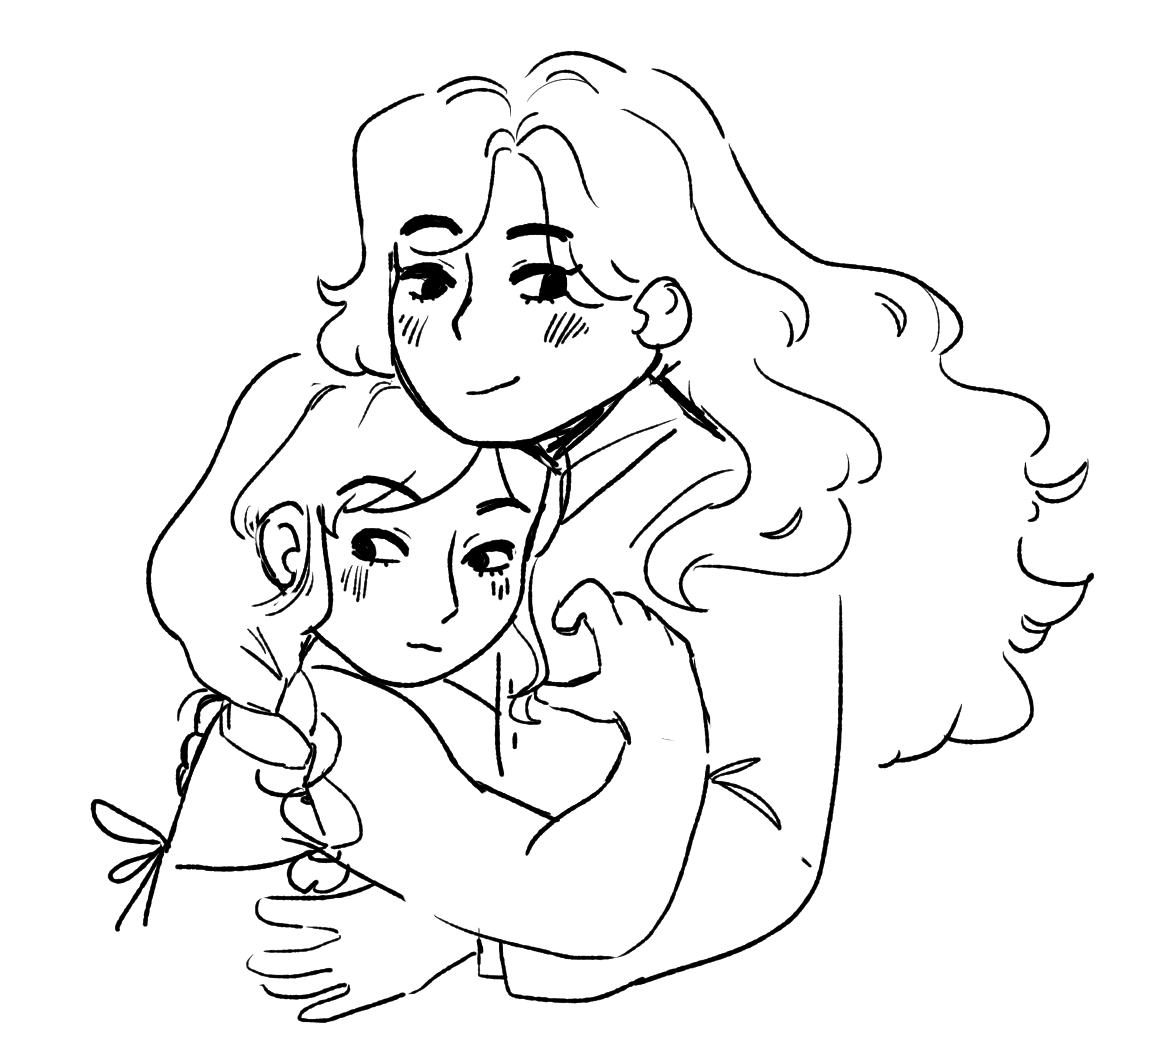 trans lesbian gfs.... they love each other very much ?#oc 